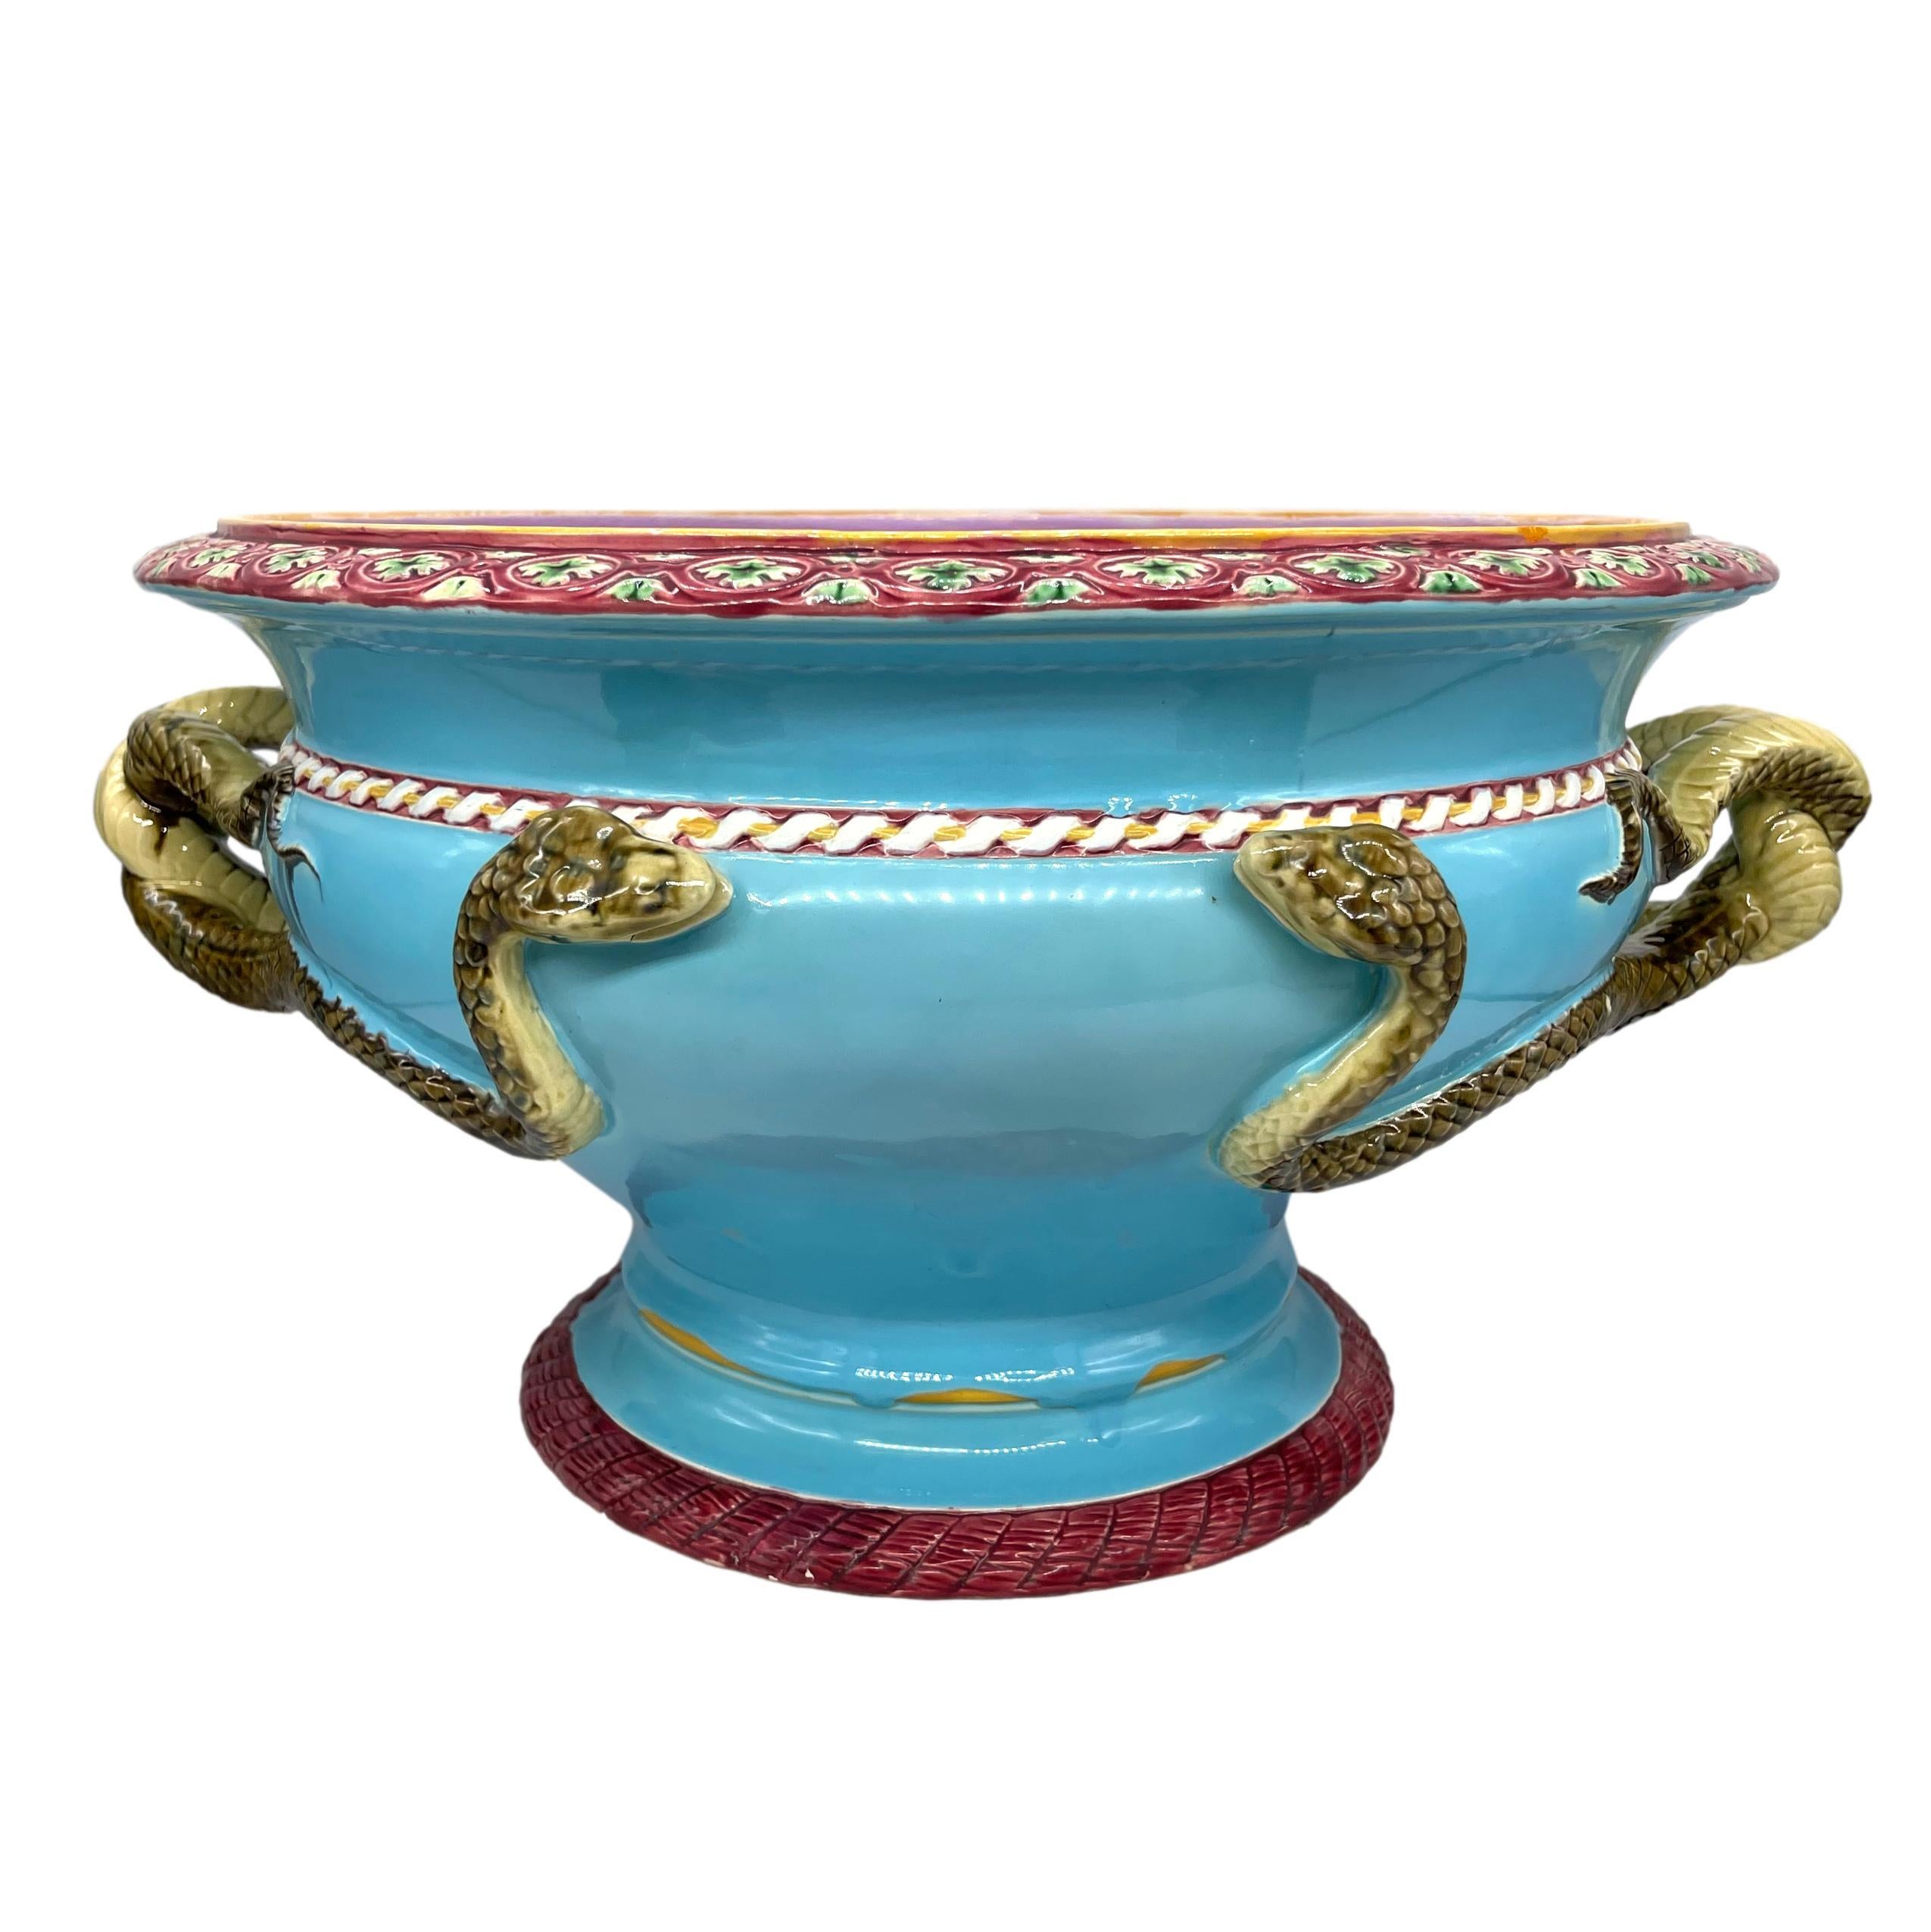 A Minton Majolica Large Turquoise Ground Jardinière Designed by Gottfried Semper (German 1803 -1879), the ovid-form body applied with entwined snakes forming the handles, the rim with a Renaissance-style band of oblong chain-work reserves with green